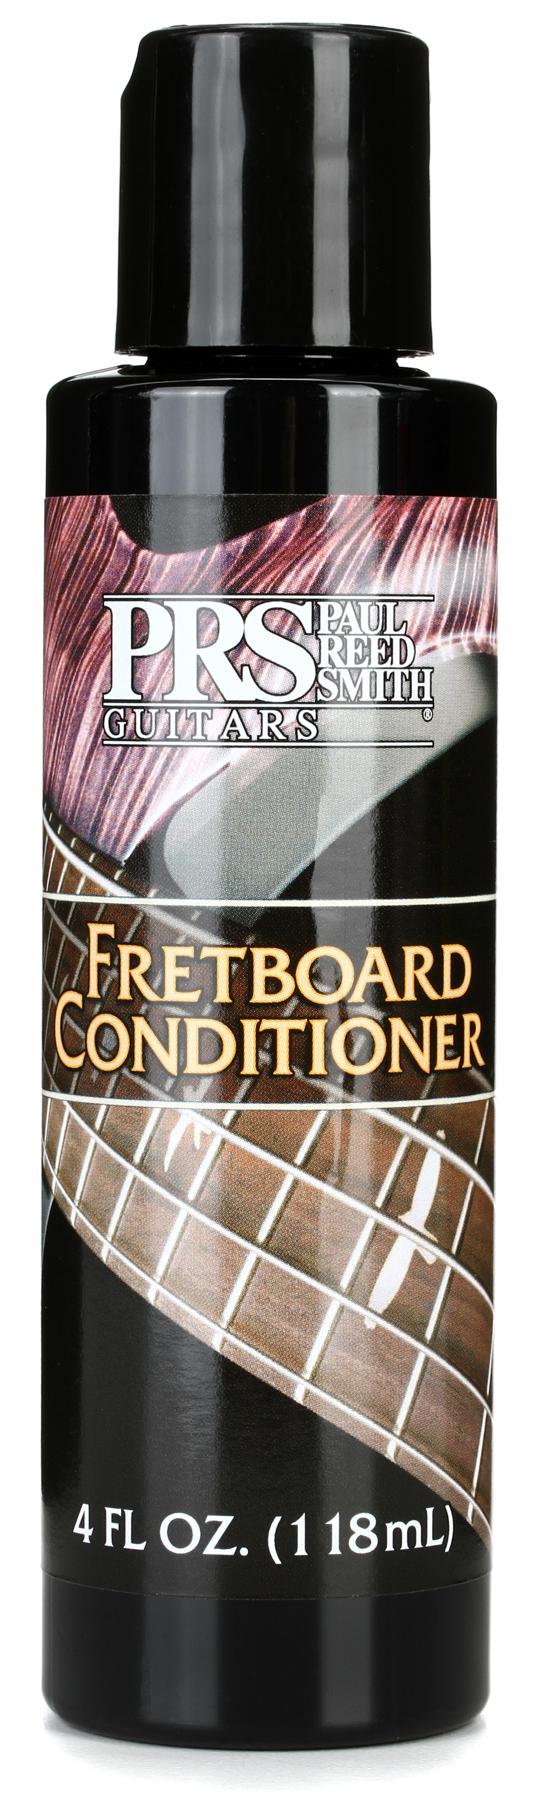 Doctors Products Fret Doctor - Fretboard Conditioner - 30mL